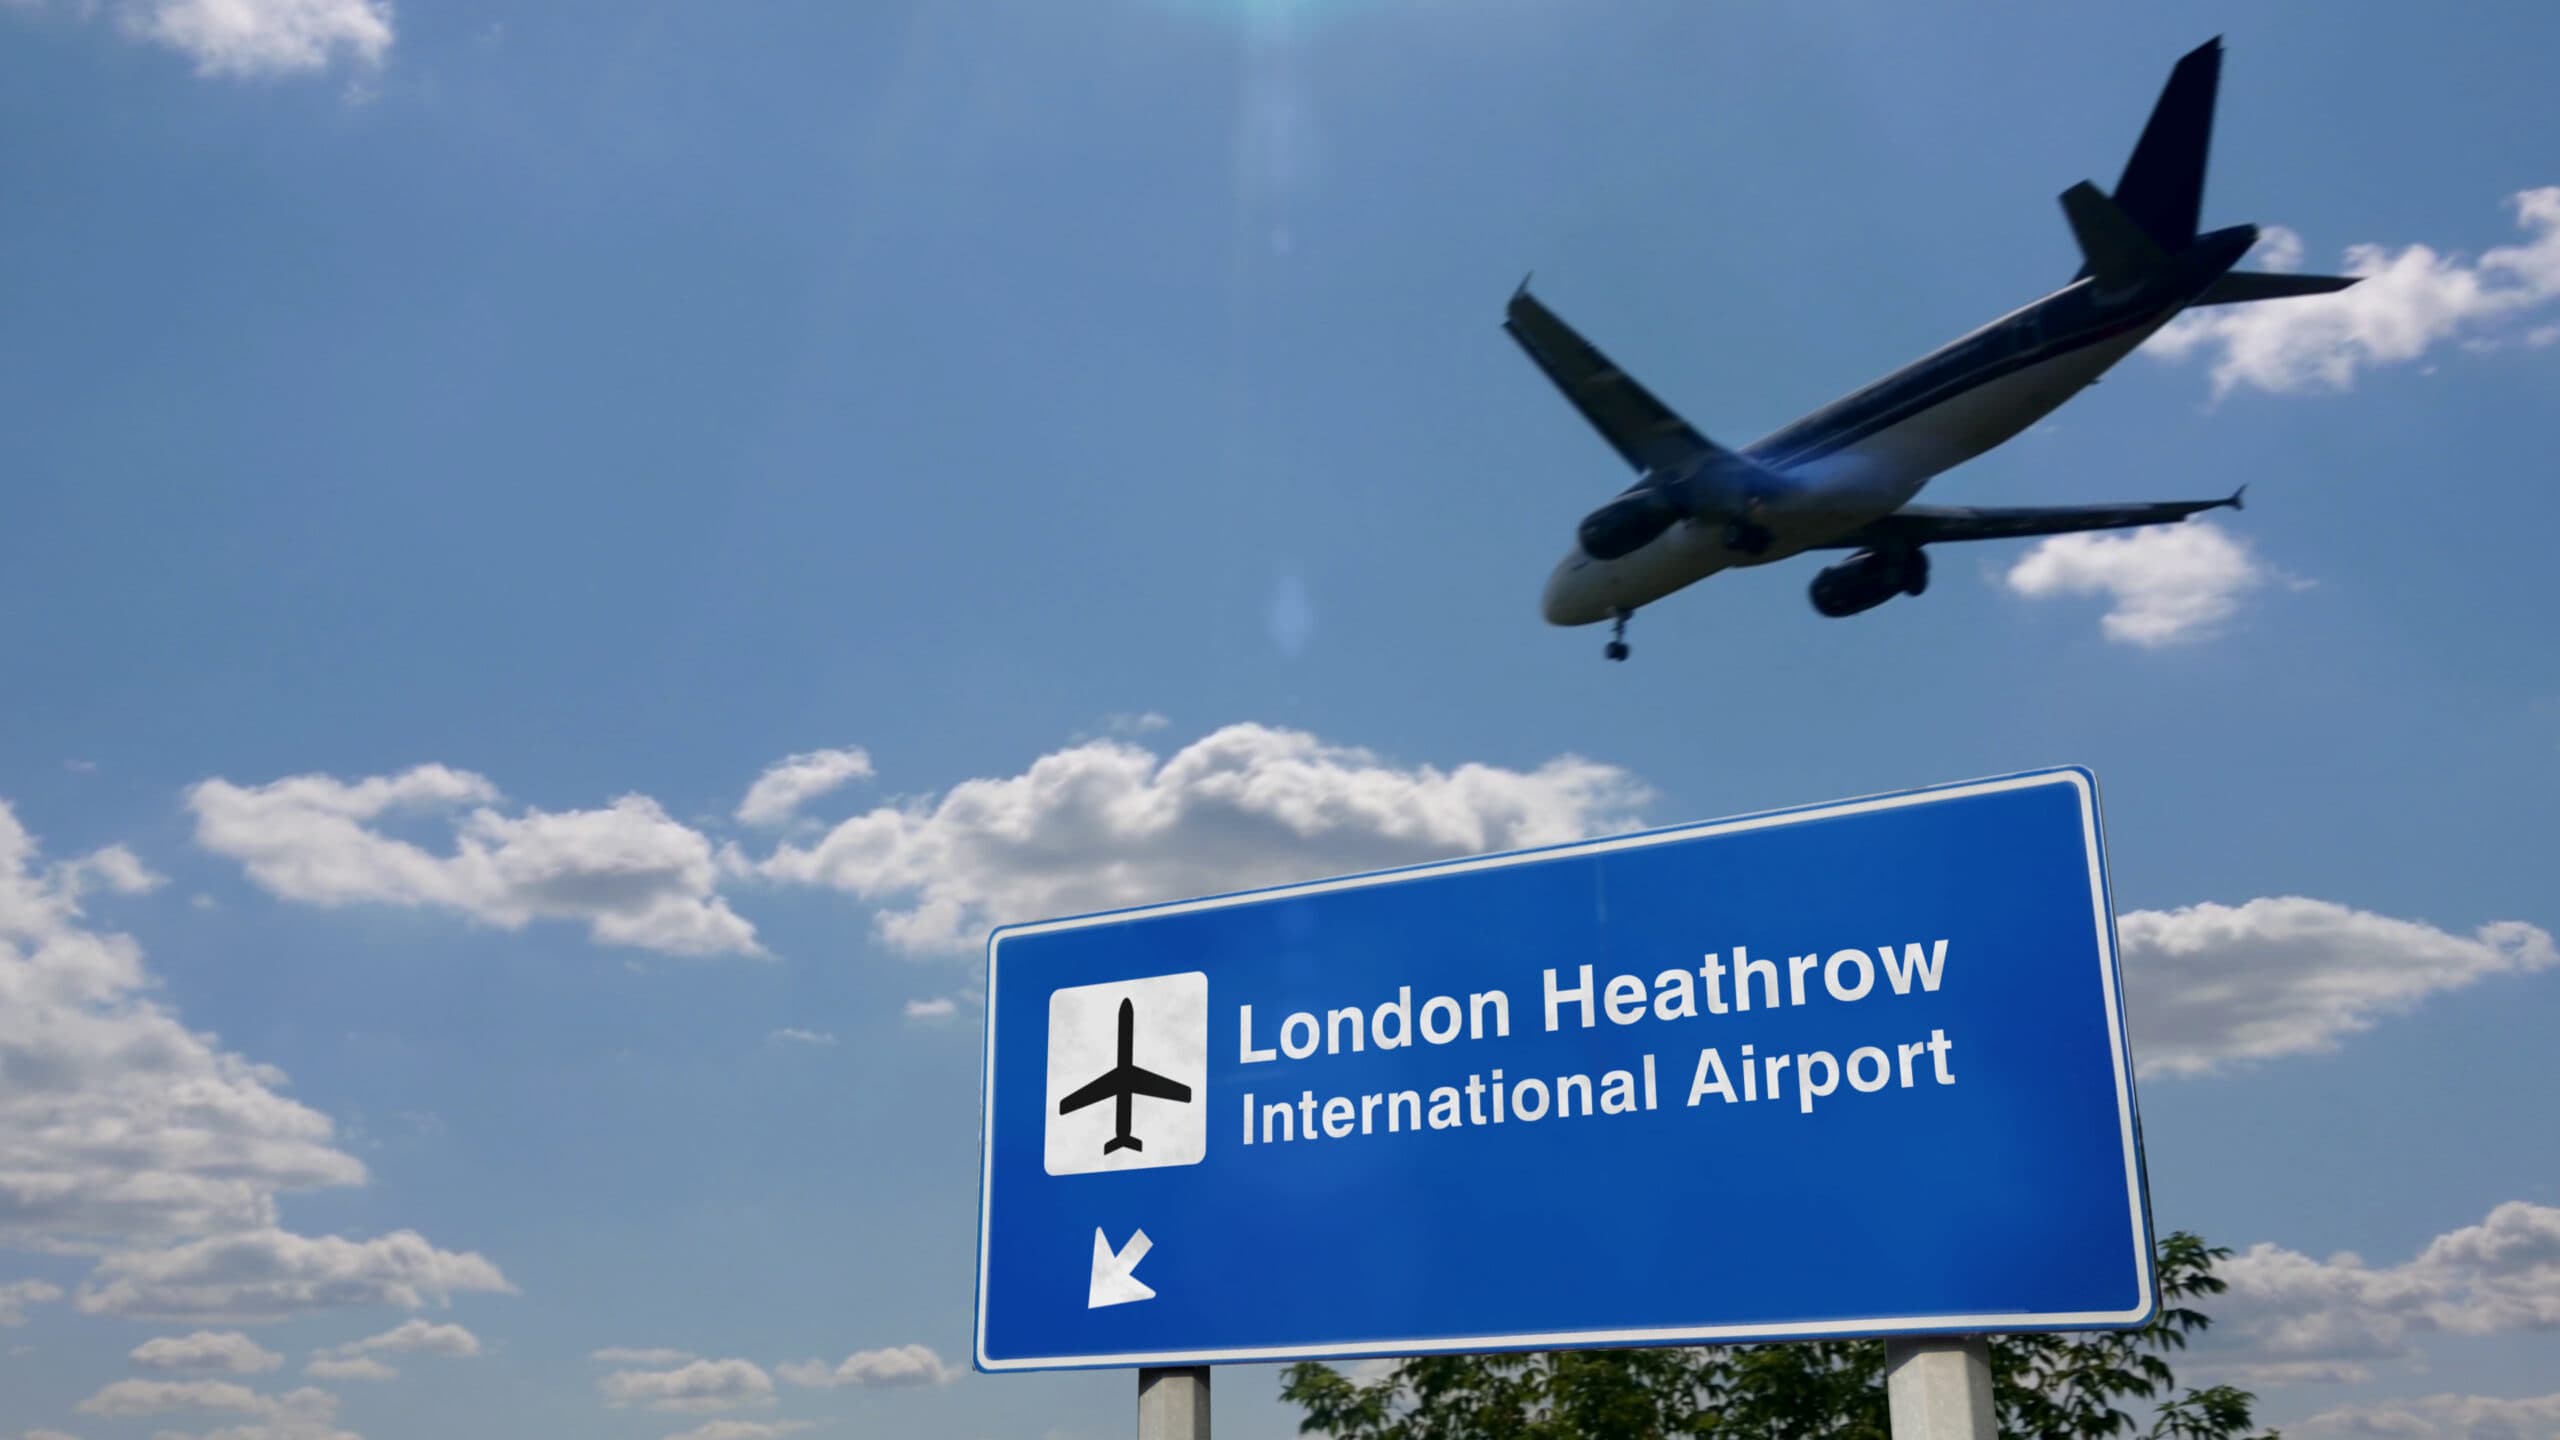 Heathrow Airport: Can You Enter On Foot?